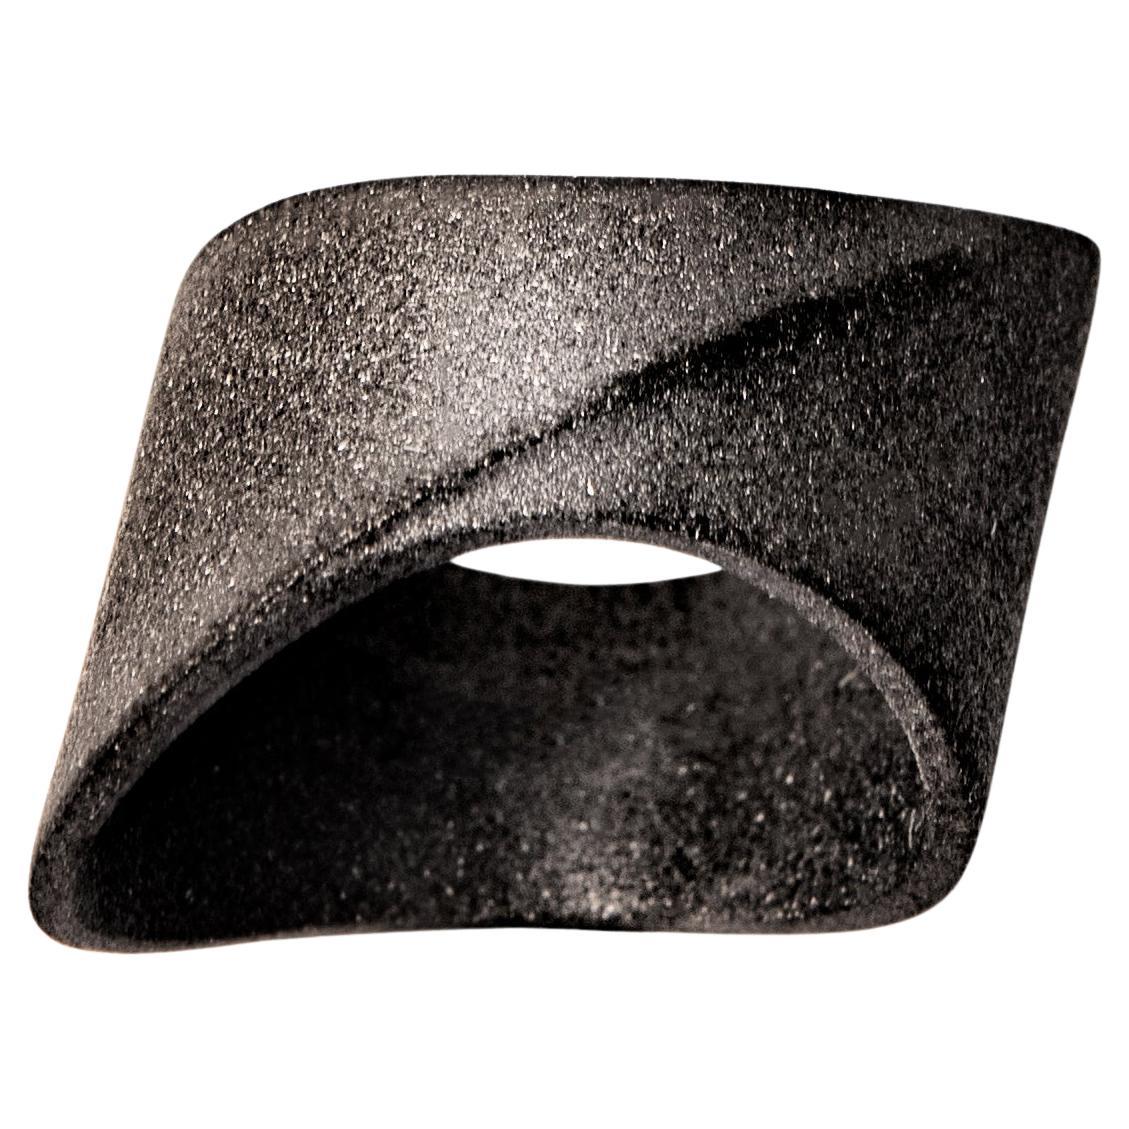 Band Ring in Black Rhodium over Sand Blasted Sterling Silver For Sale